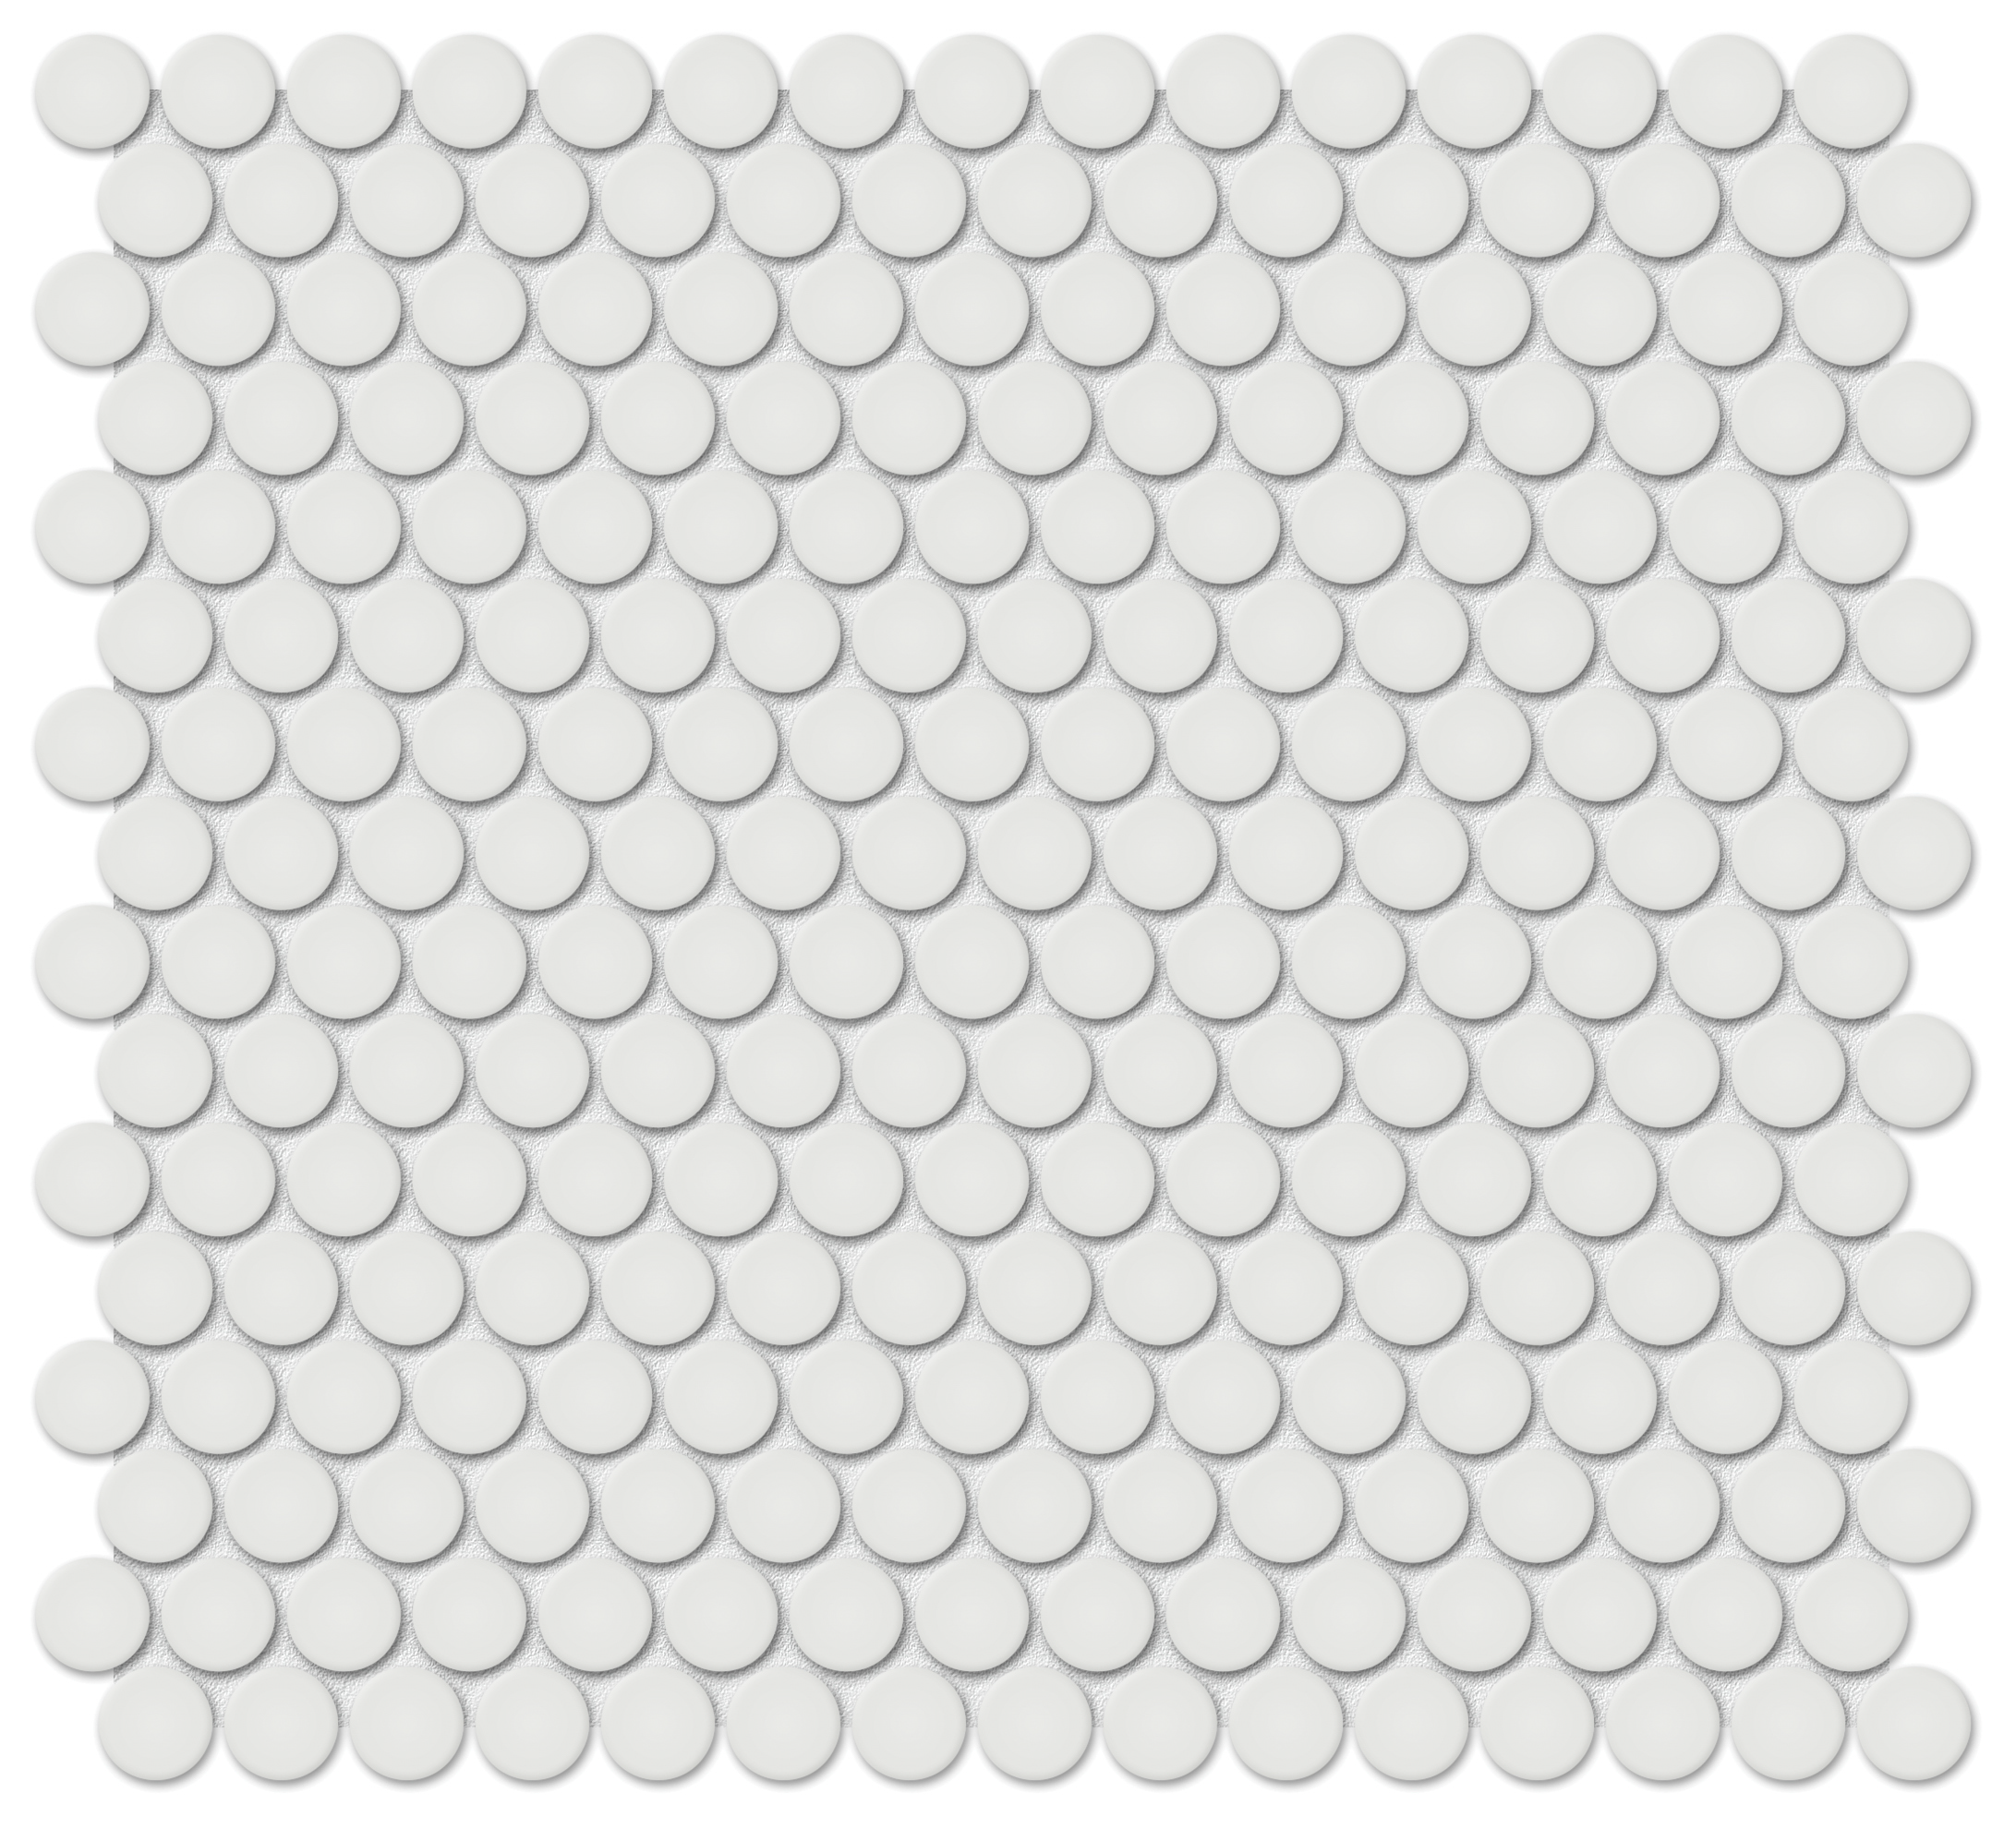 vintage grey penny round 3_4-inch pattern glazed porcelain mosaic from soho anatolia collection distributed by surface group international matte finish pressed edge mesh shape